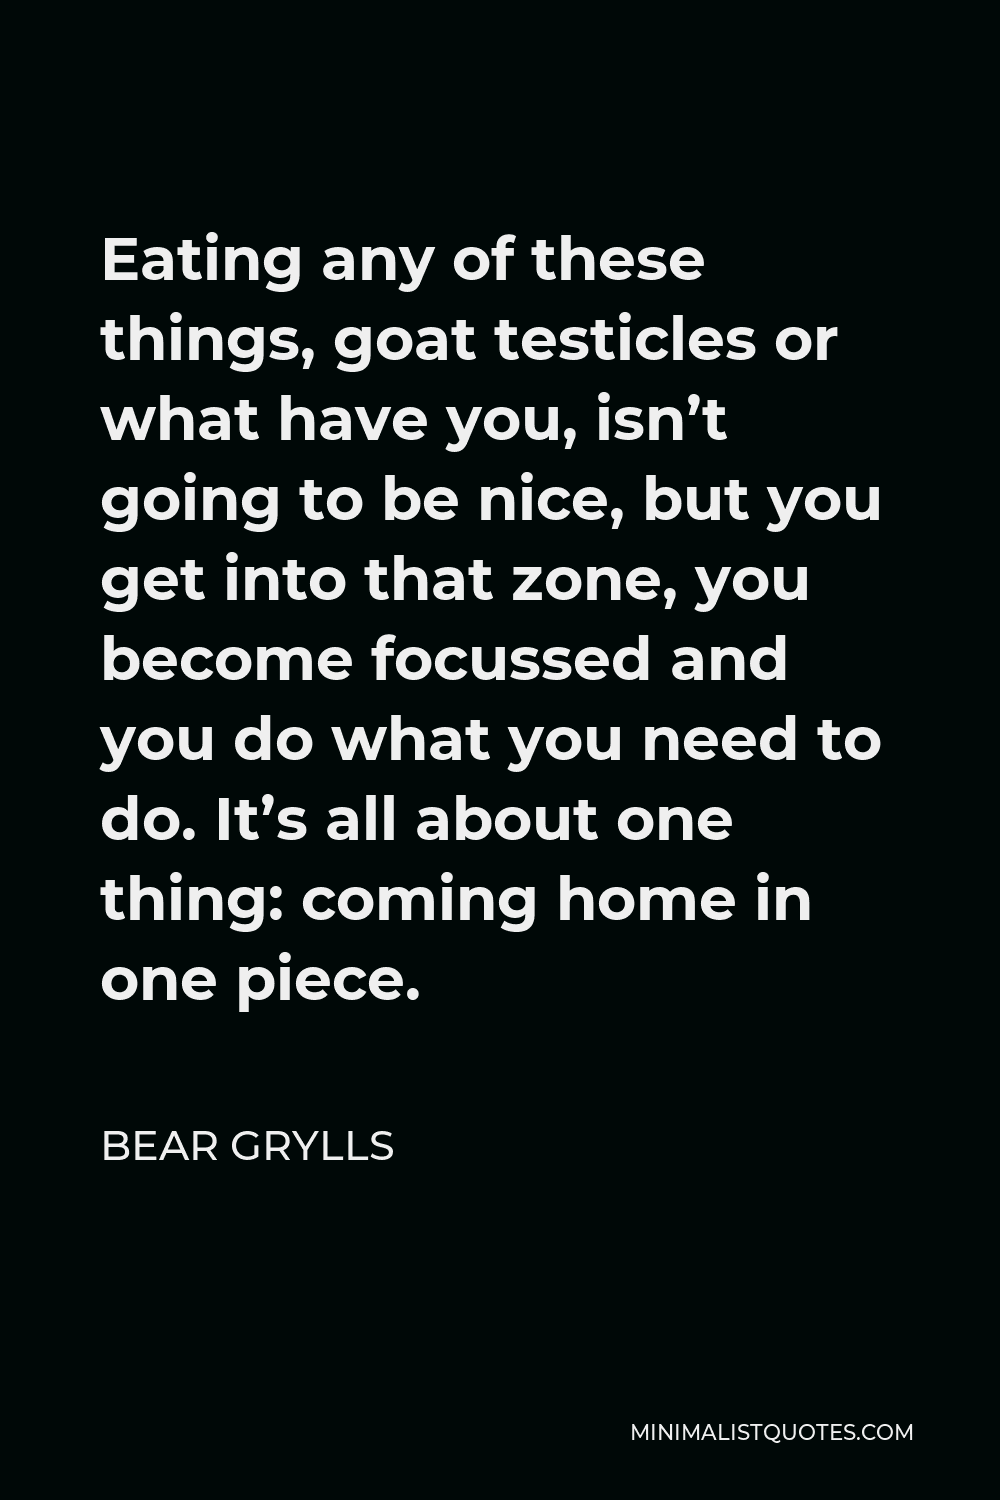 Bear Grylls Quote - Eating any of these things, goat testicles or what have you, isn’t going to be nice, but you get into that zone, you become focussed and you do what you need to do. It’s all about one thing: coming home in one piece.